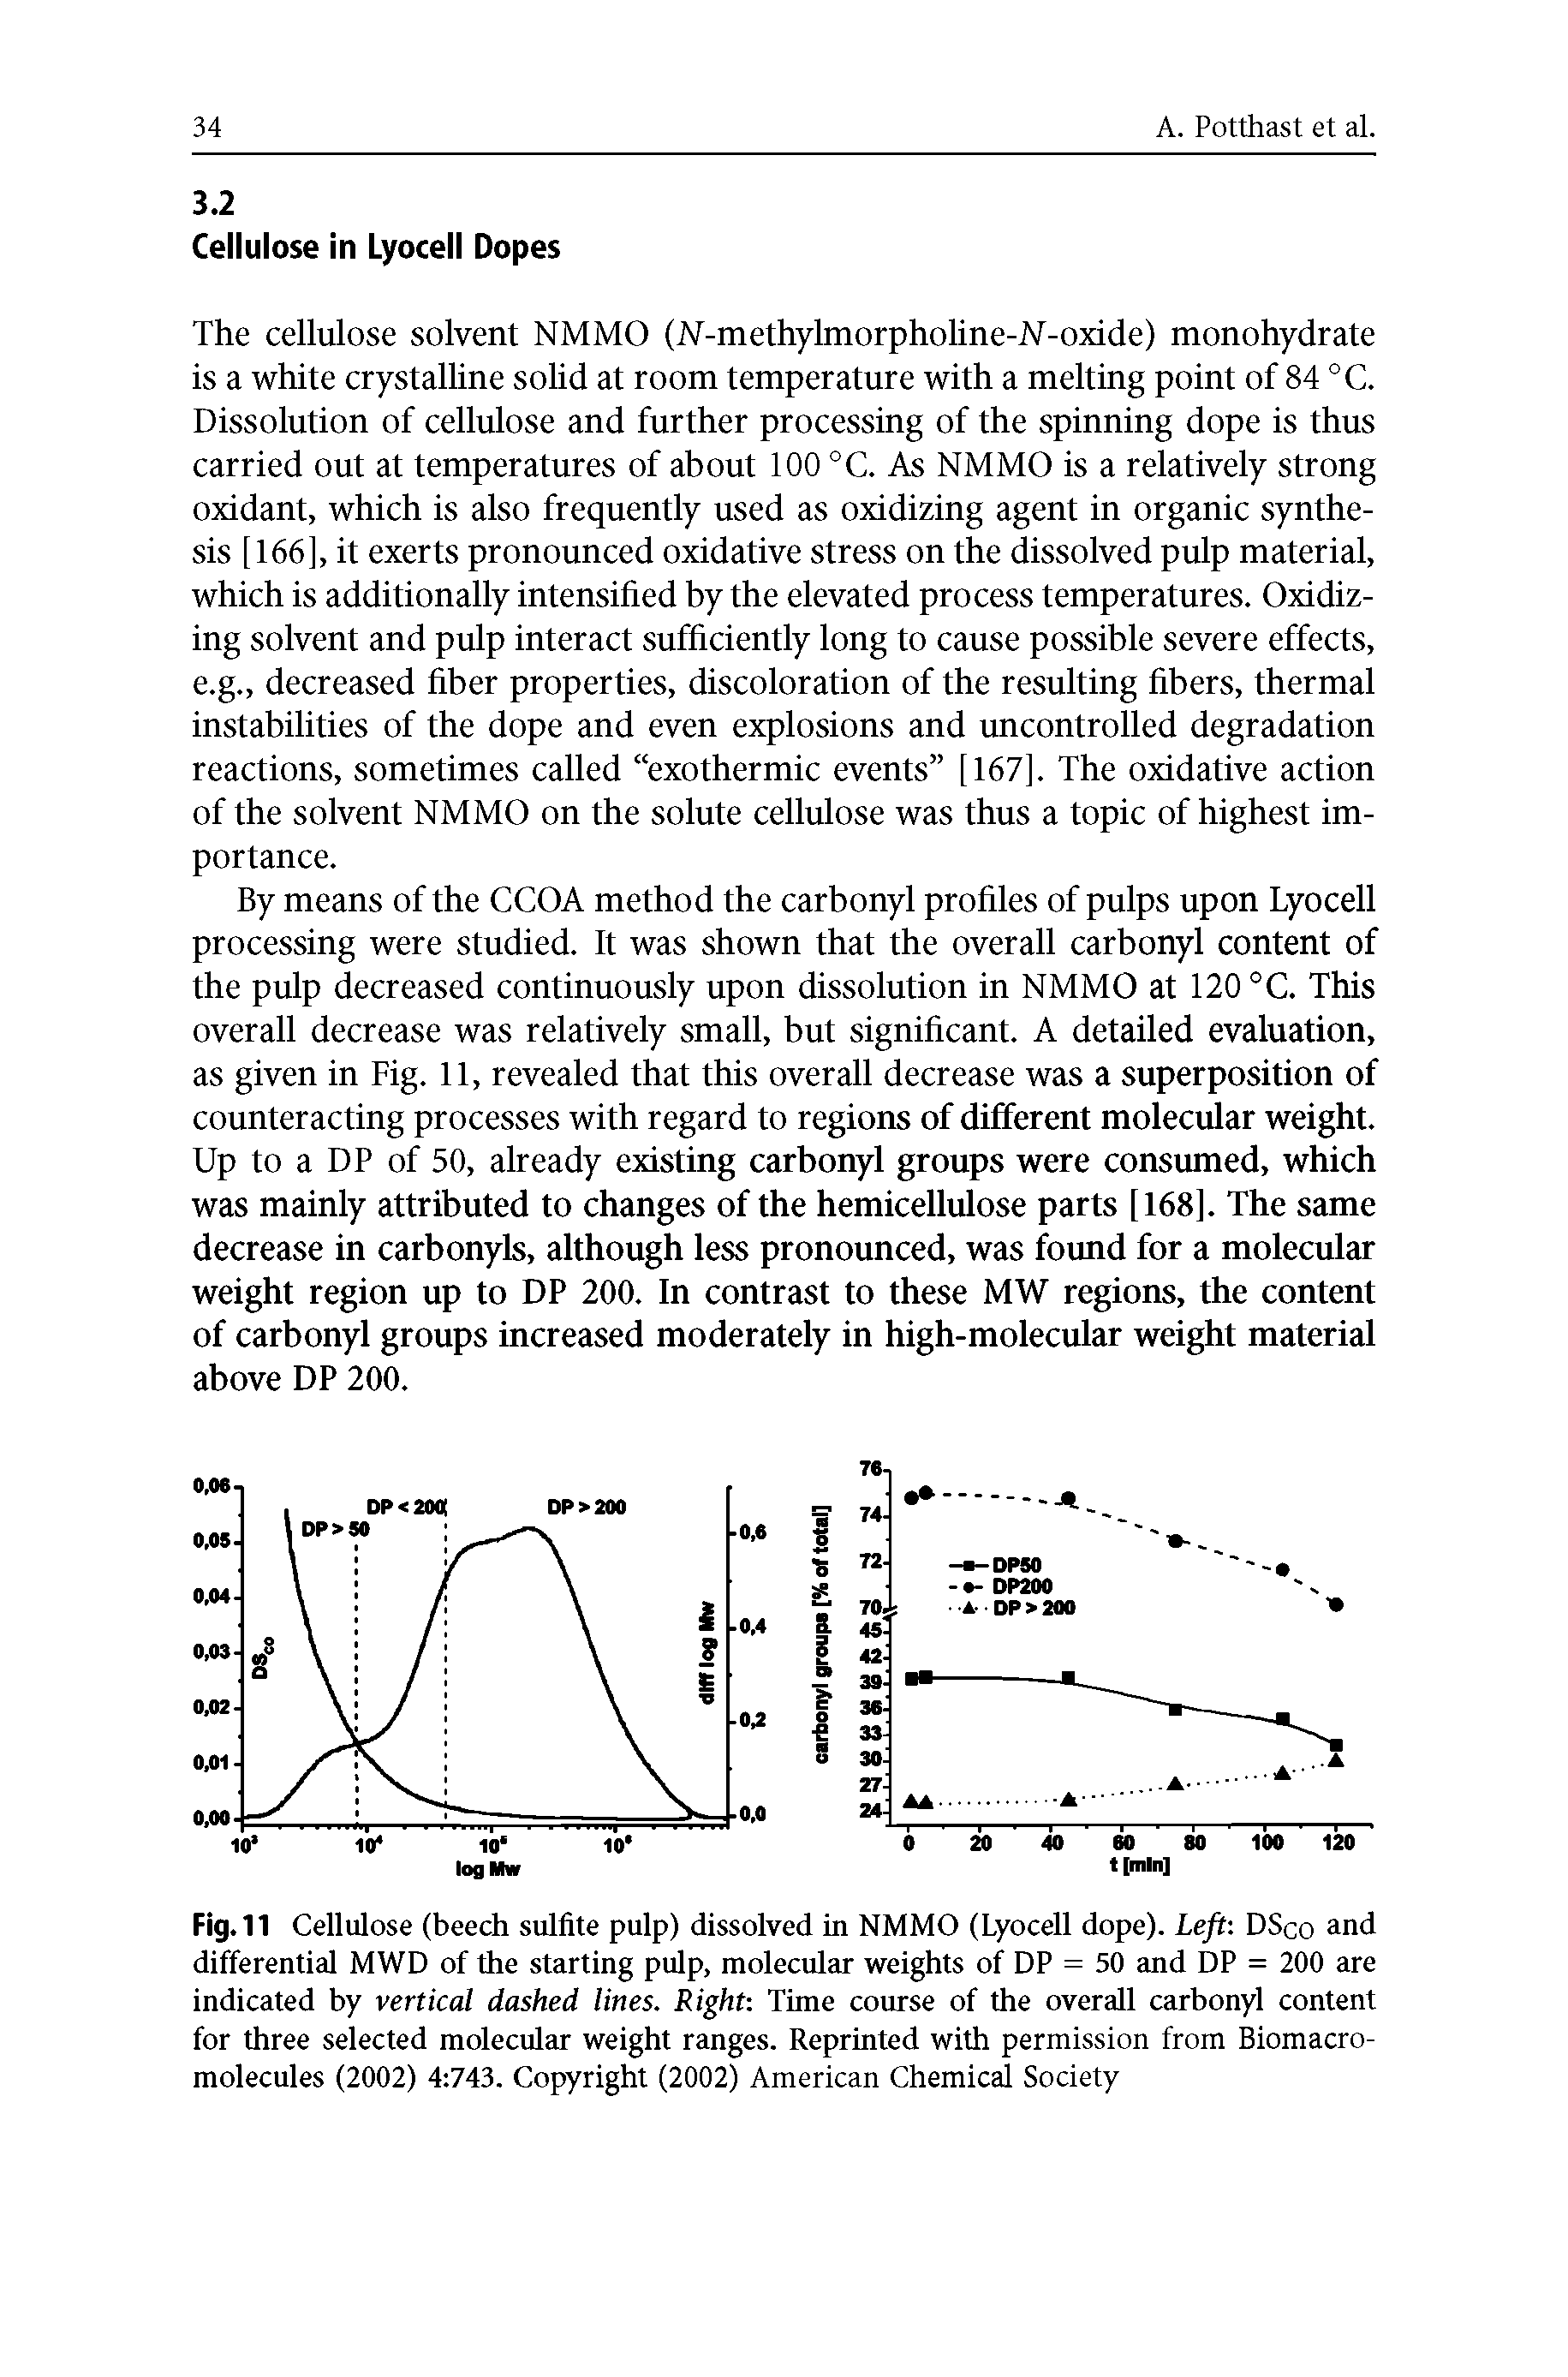 Fig. 11 Cellulose (beech sulfite pulp) dissolved in NMMO (Lyocell dope). Left DSco and differential MWD of the starting pulp, molecular weights of DP = 50 and DP = 200 are indicated by vertical dashed lines. Right Time course of the overall carbonyl content for three selected molecular weight ranges. Reprinted with permission from Biomacromolecules (2002) 4 743. Copyright (2002) American Chemical Society...